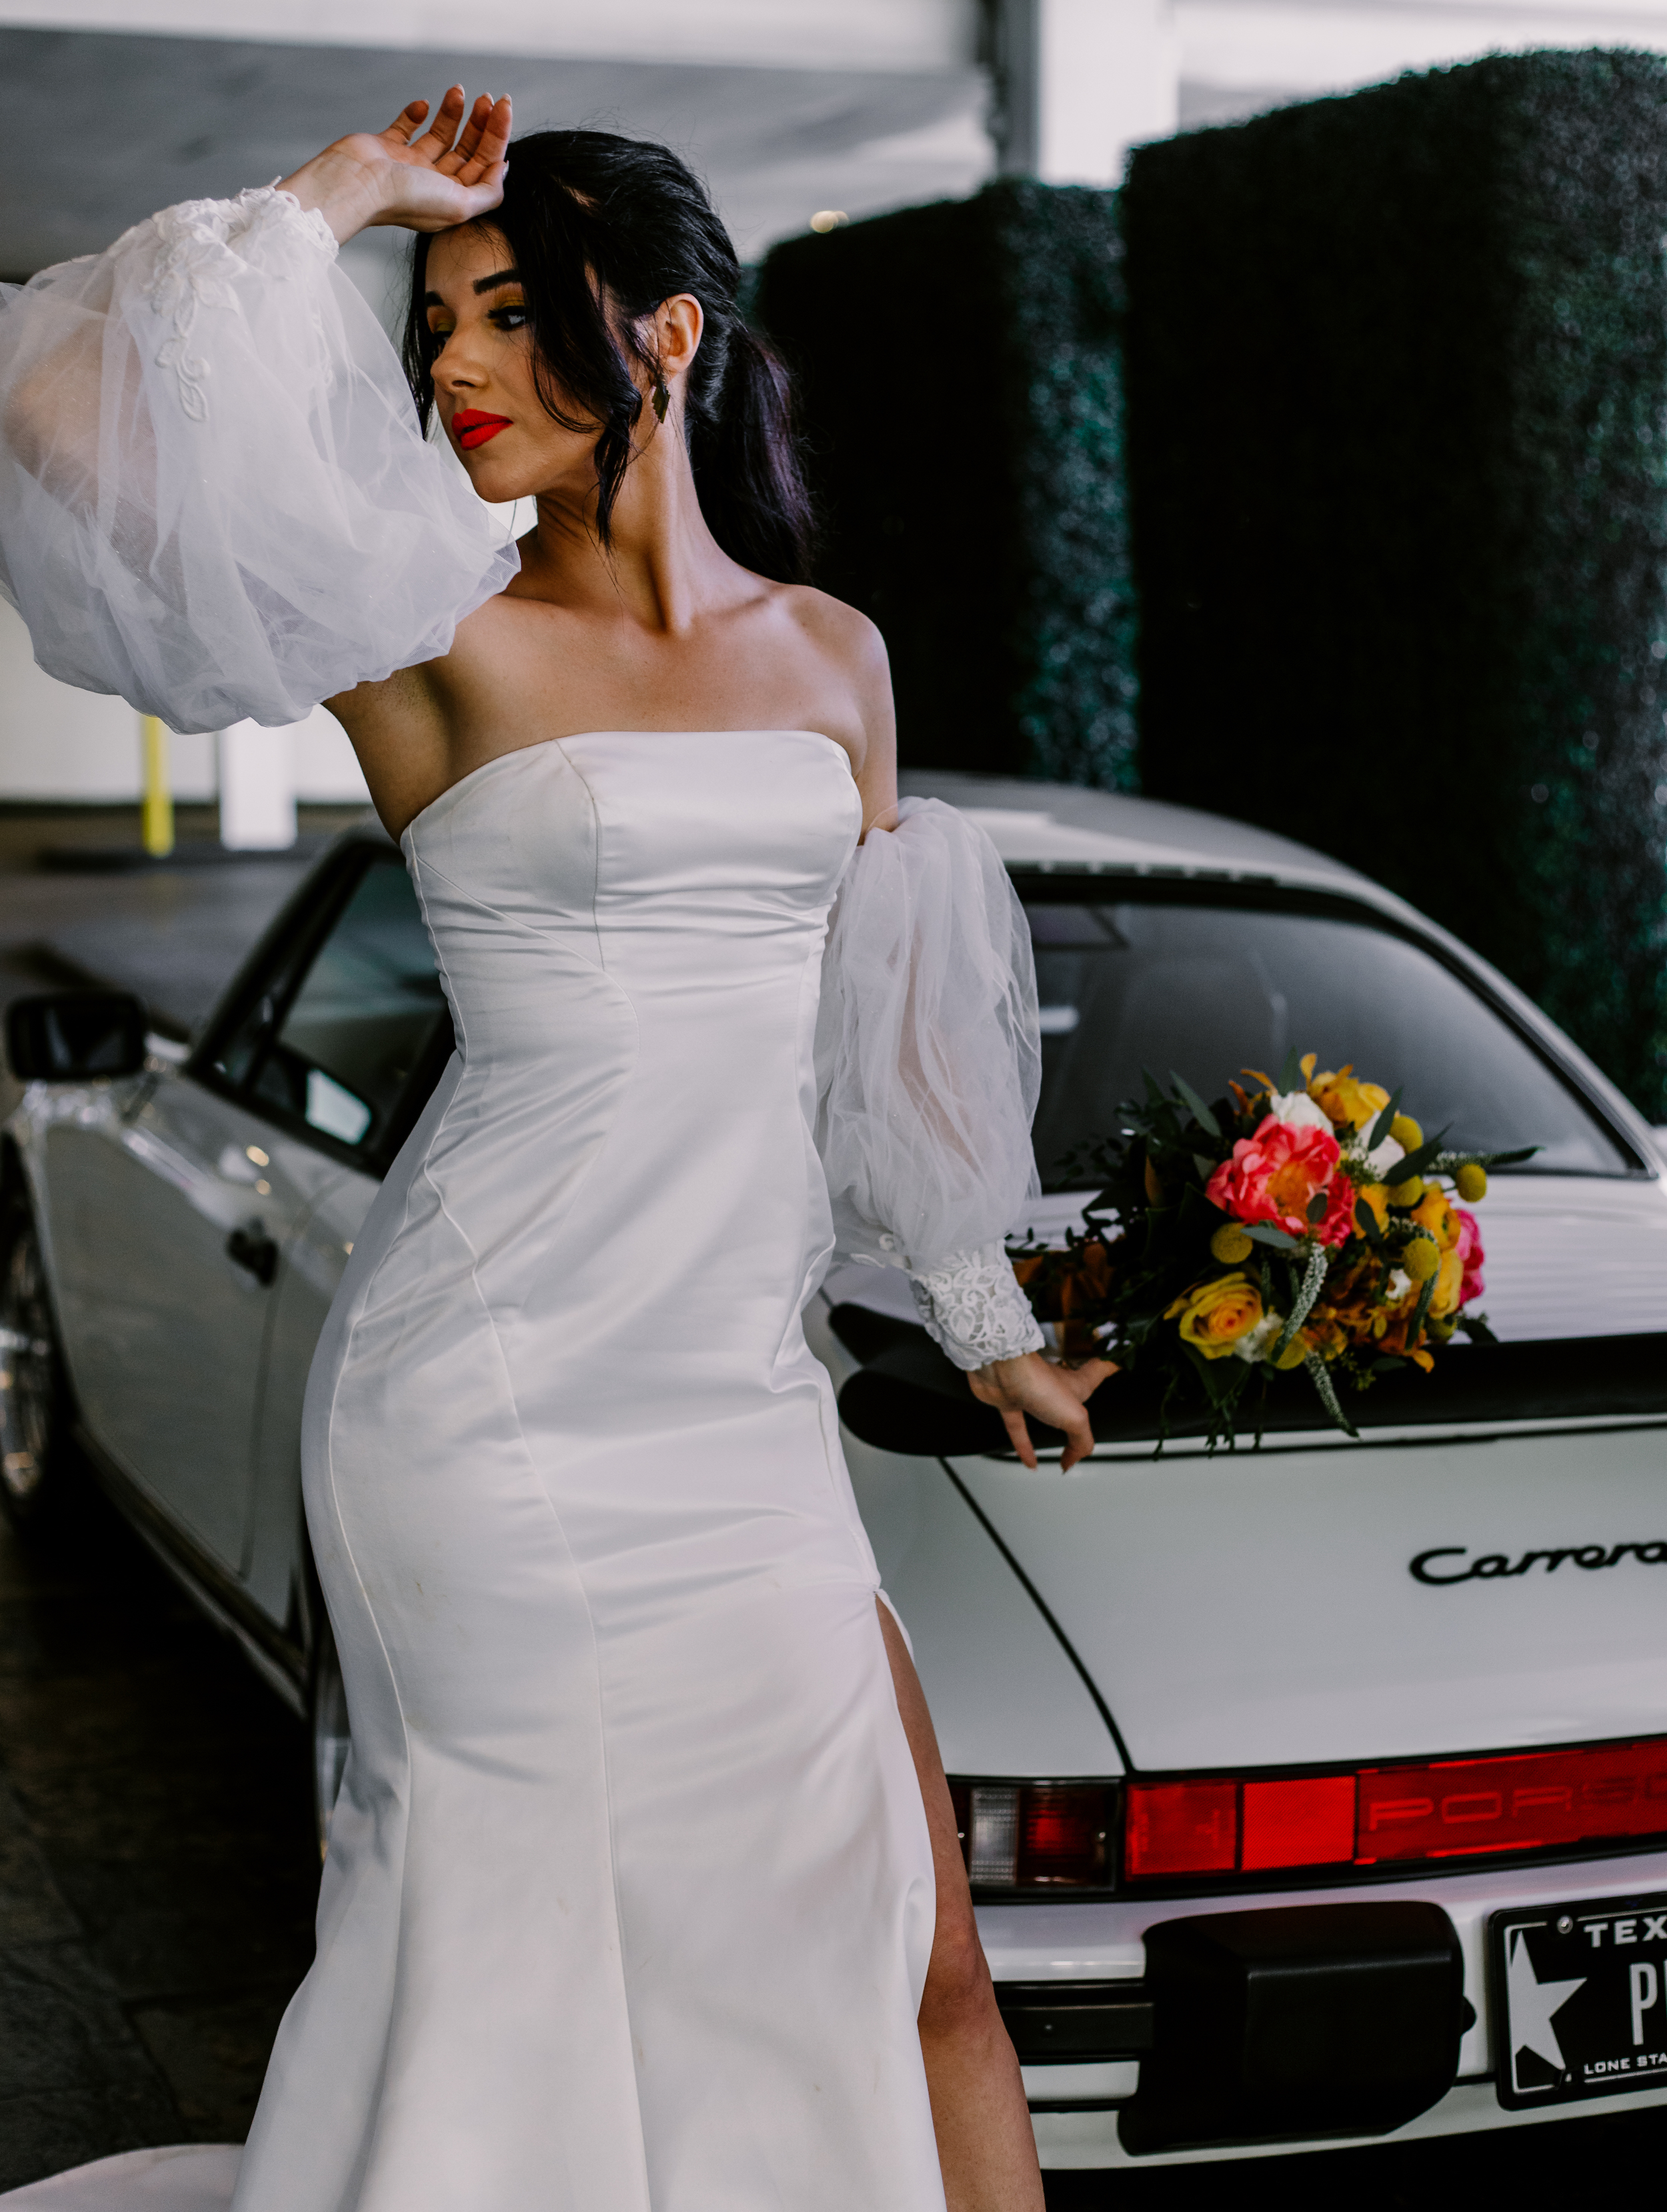 A bride poses next to a white vintage Porsche while her bridal bouquet is set on top of the trunk.